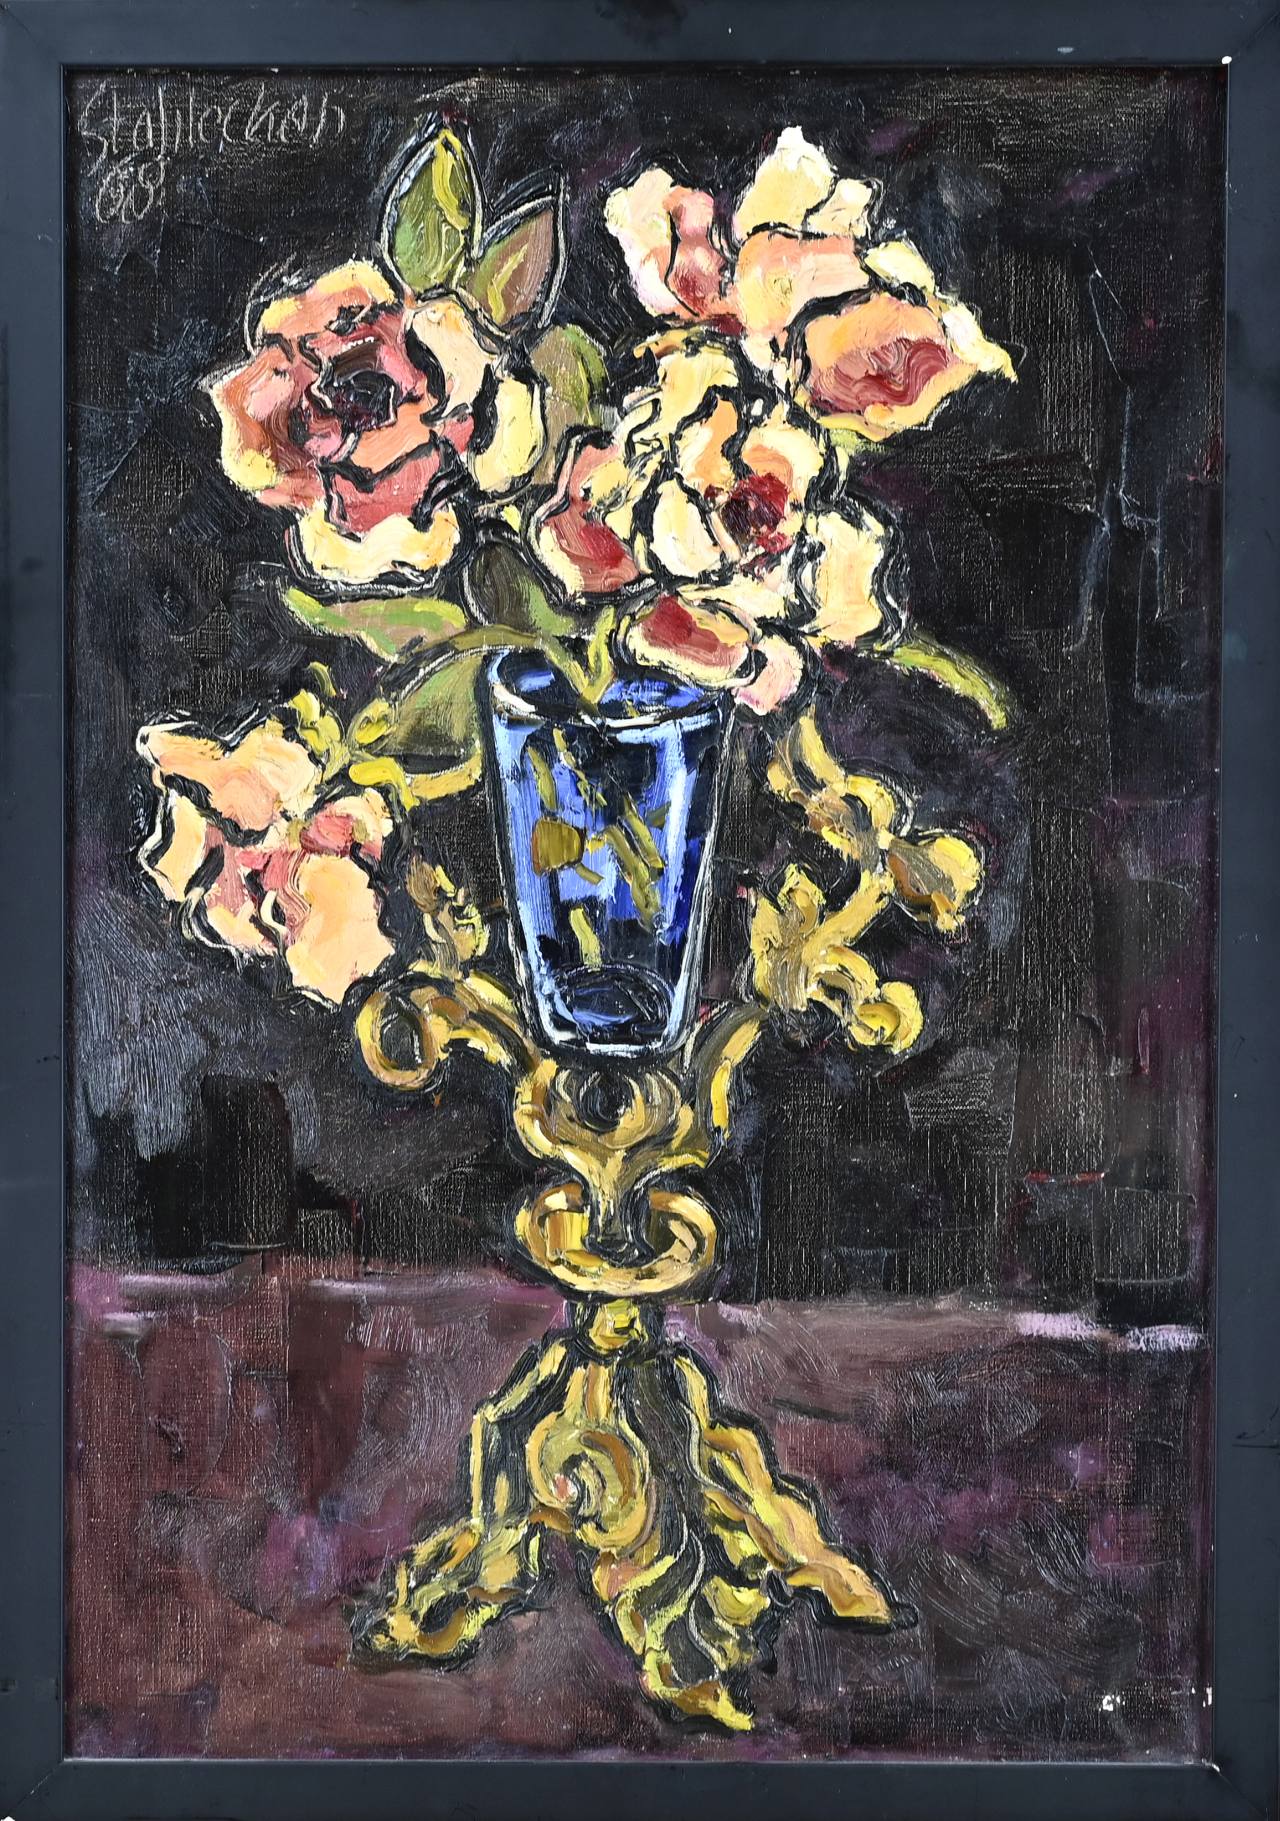 A. Stahlecker, Decorative vase with flowers